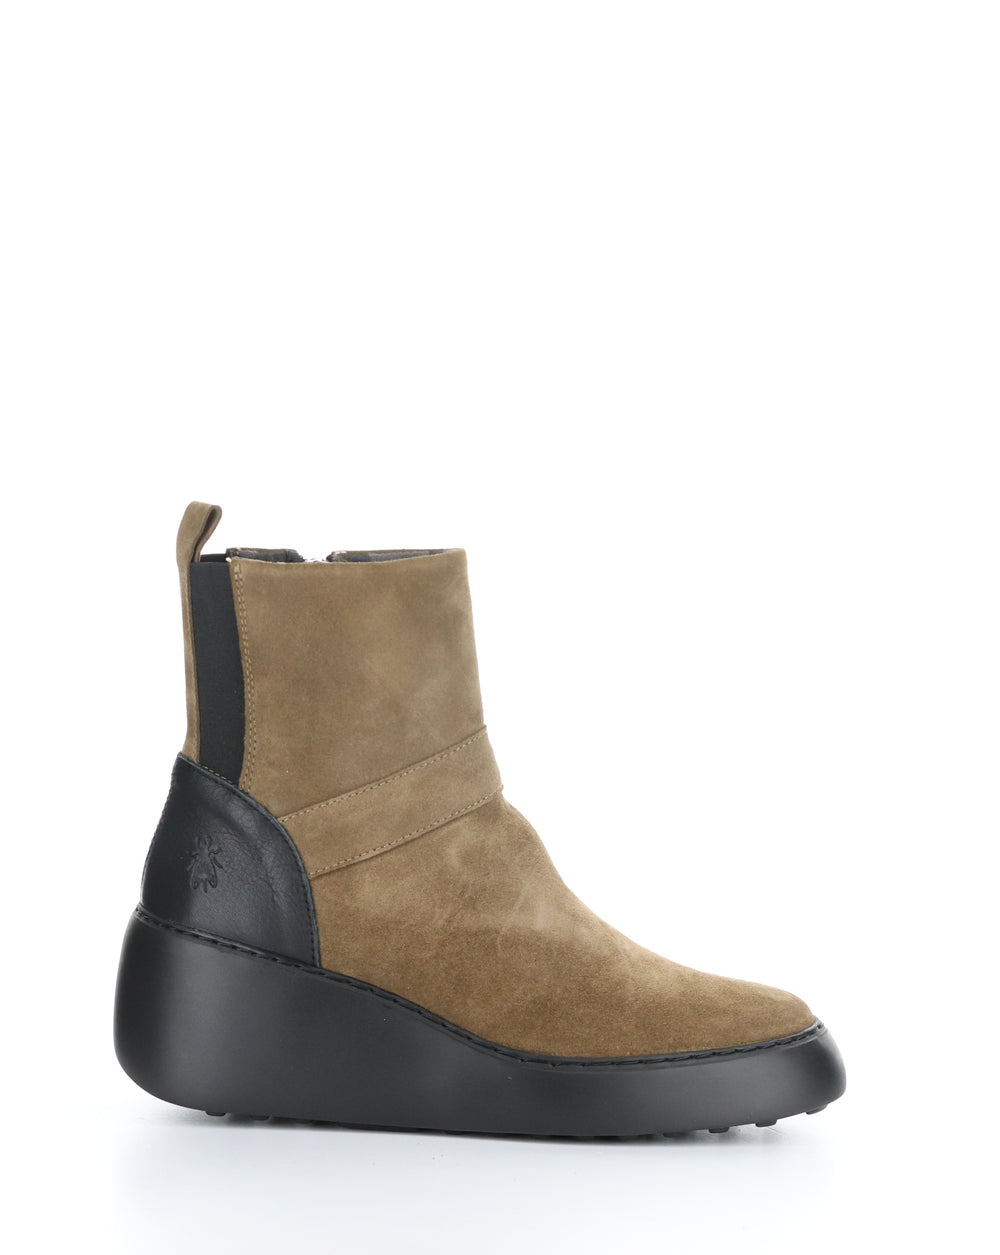 DOXE604FLY 002 TAUPE/BLACK Elasticated Boots